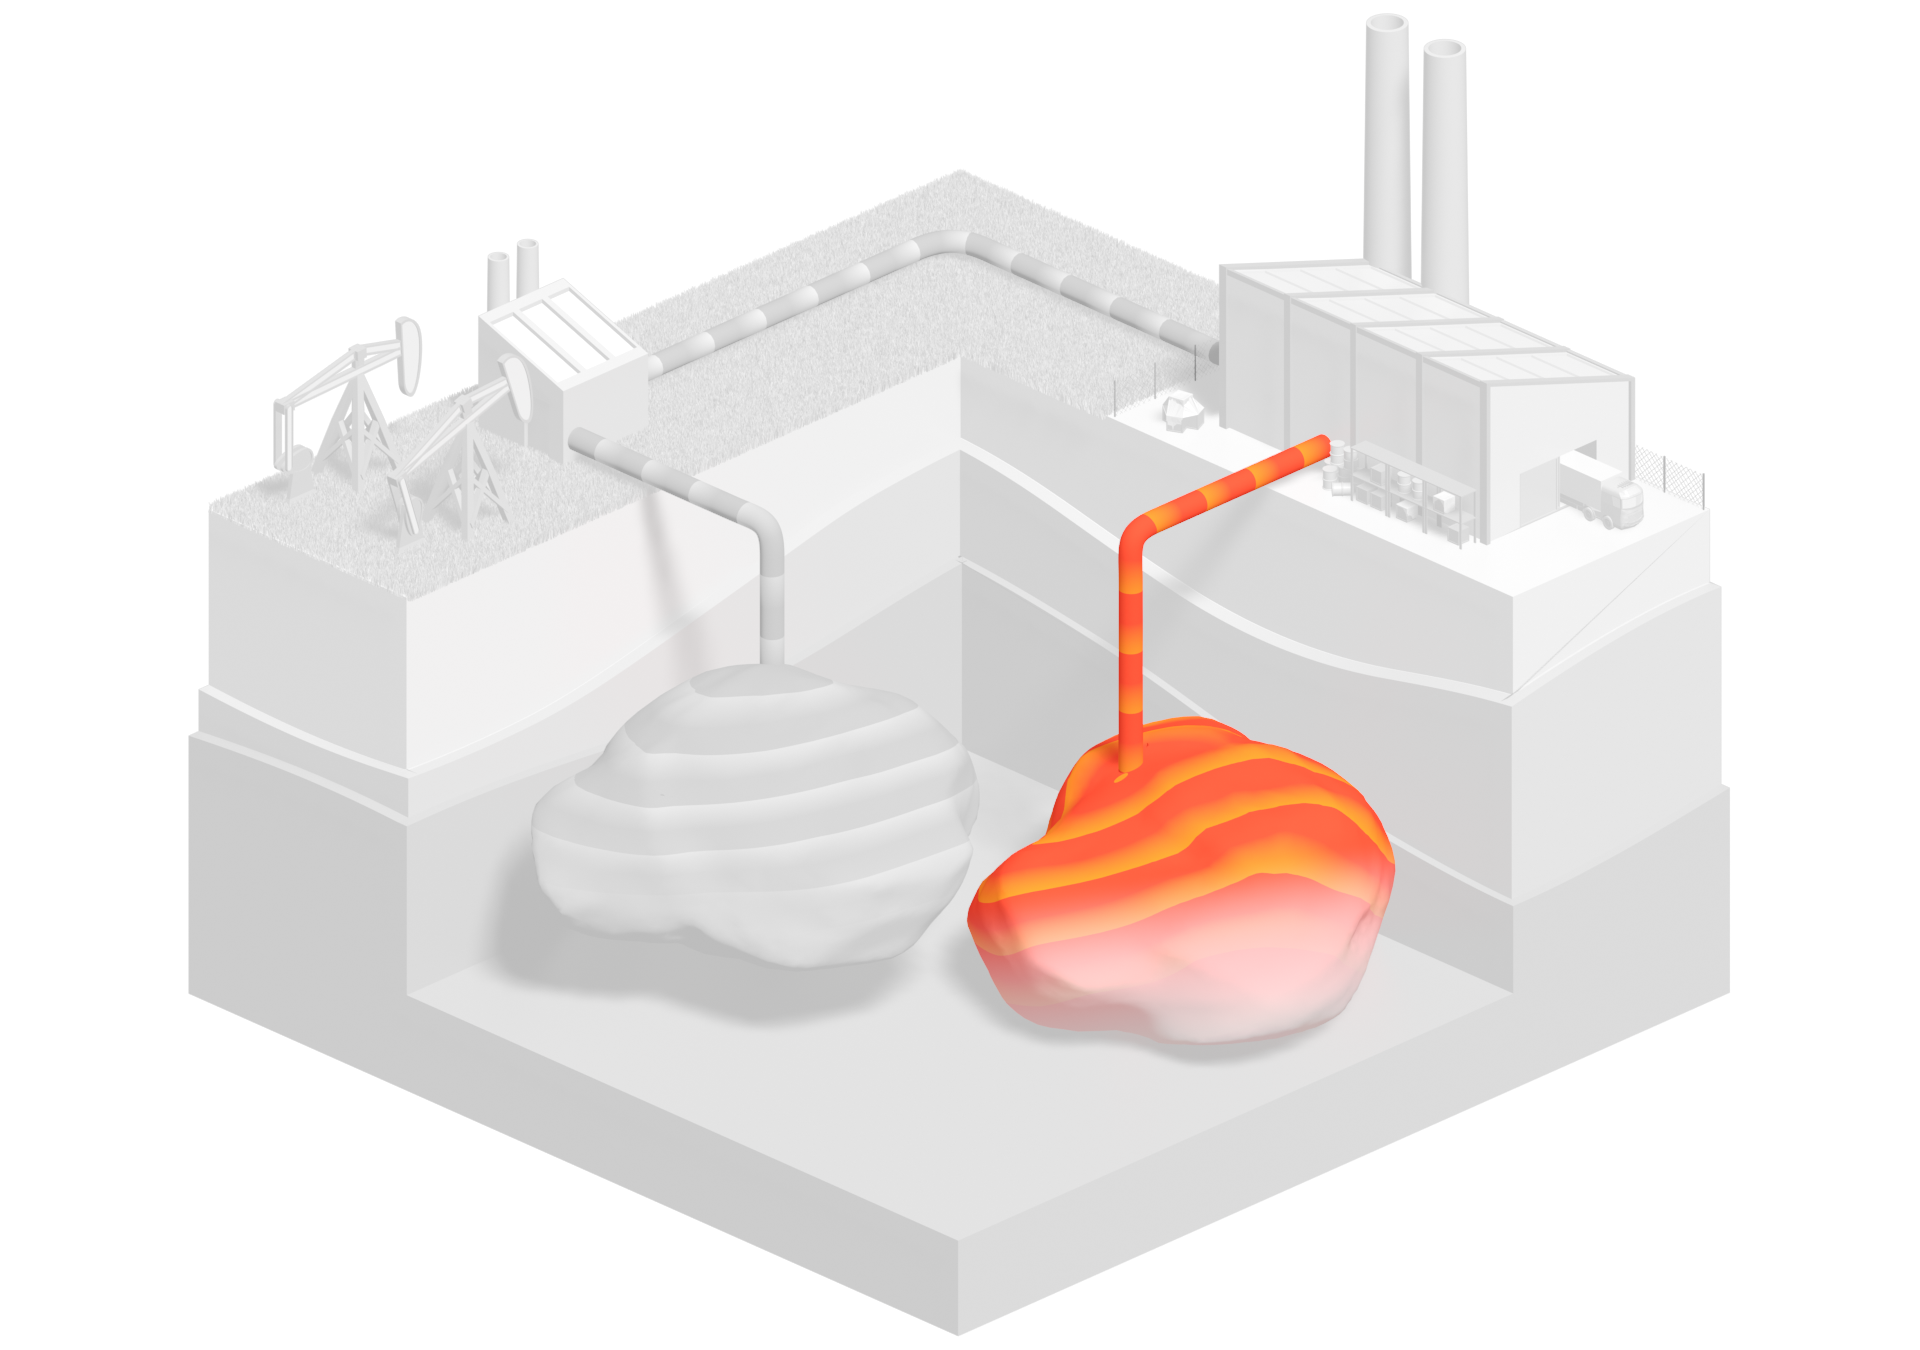 Carbon Capture and Storage stores the emissions of fossil fuels inertly in the subsurface.